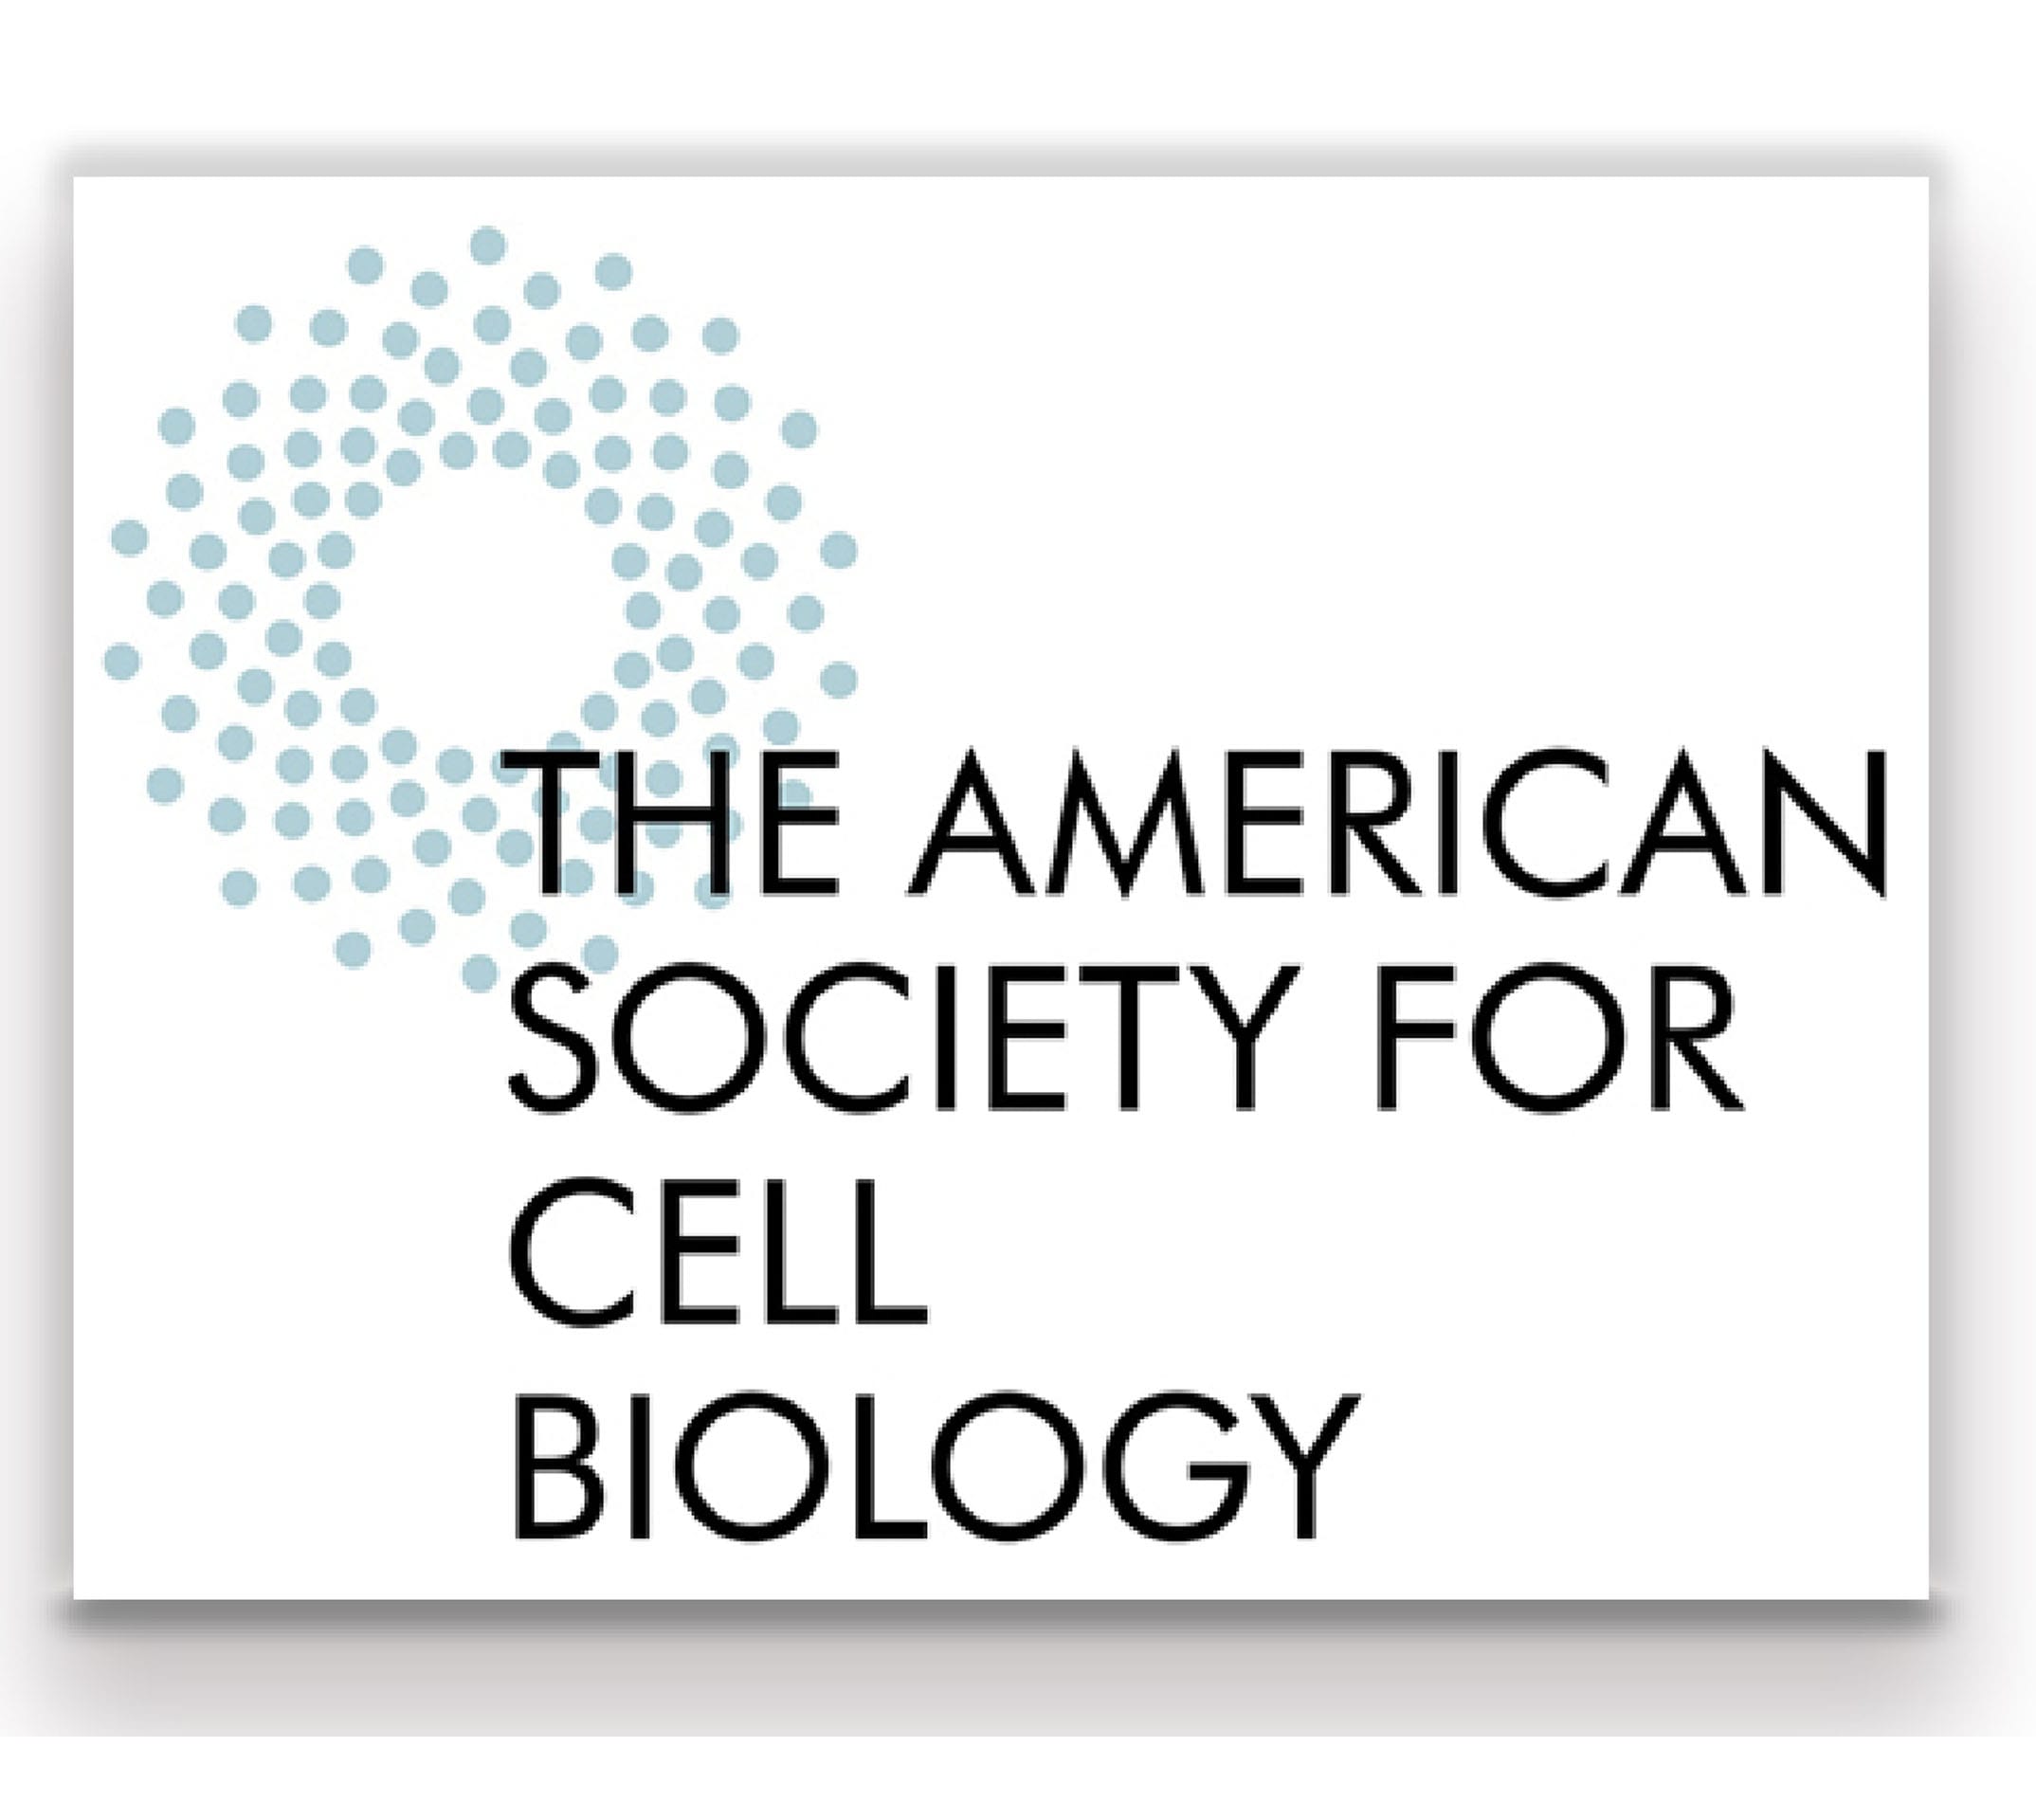 The American Society for Cell Biology